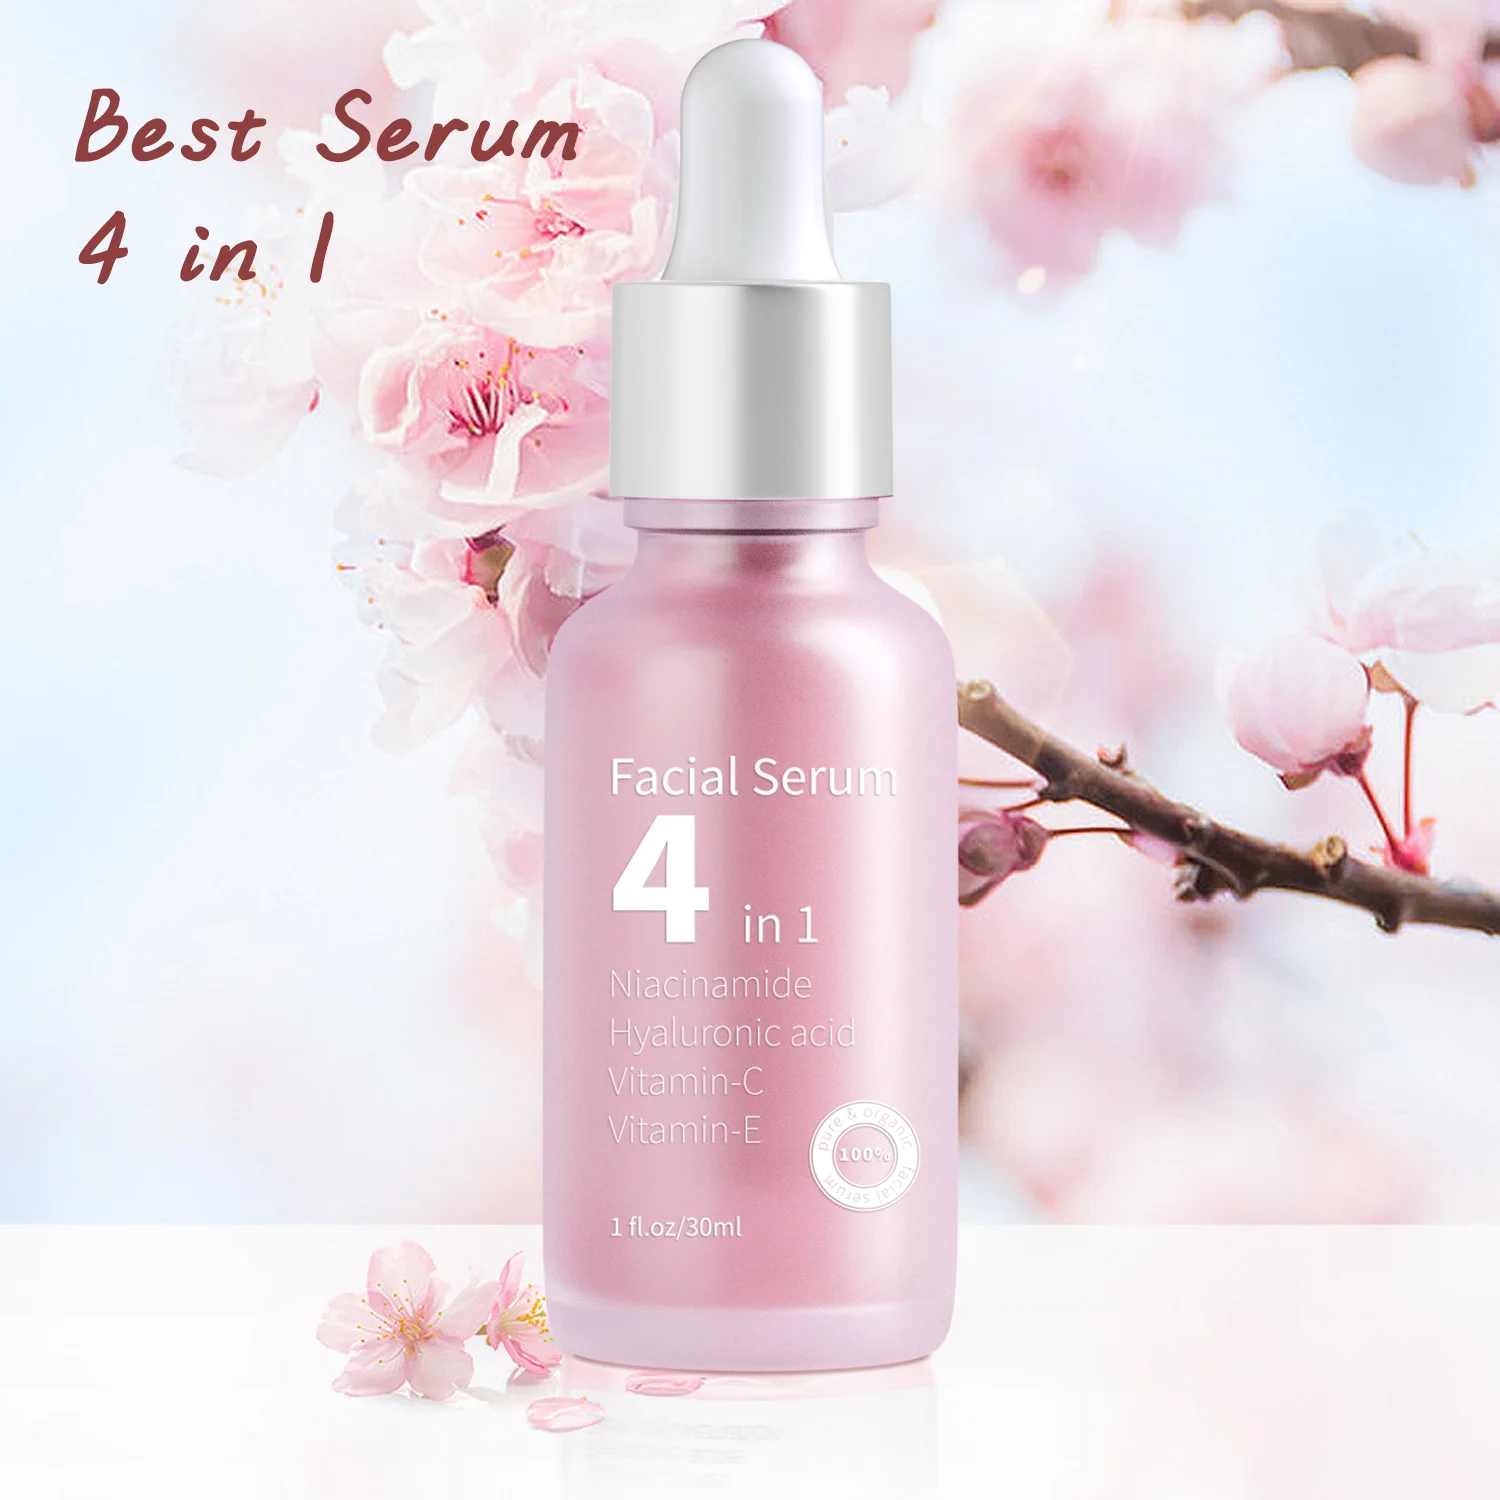 

Private Label 4 in 1 Face Serum 30% Vitamin C with HA Nicotinamide Anti-aging Hydrating Whitening Skin Serum, Pink